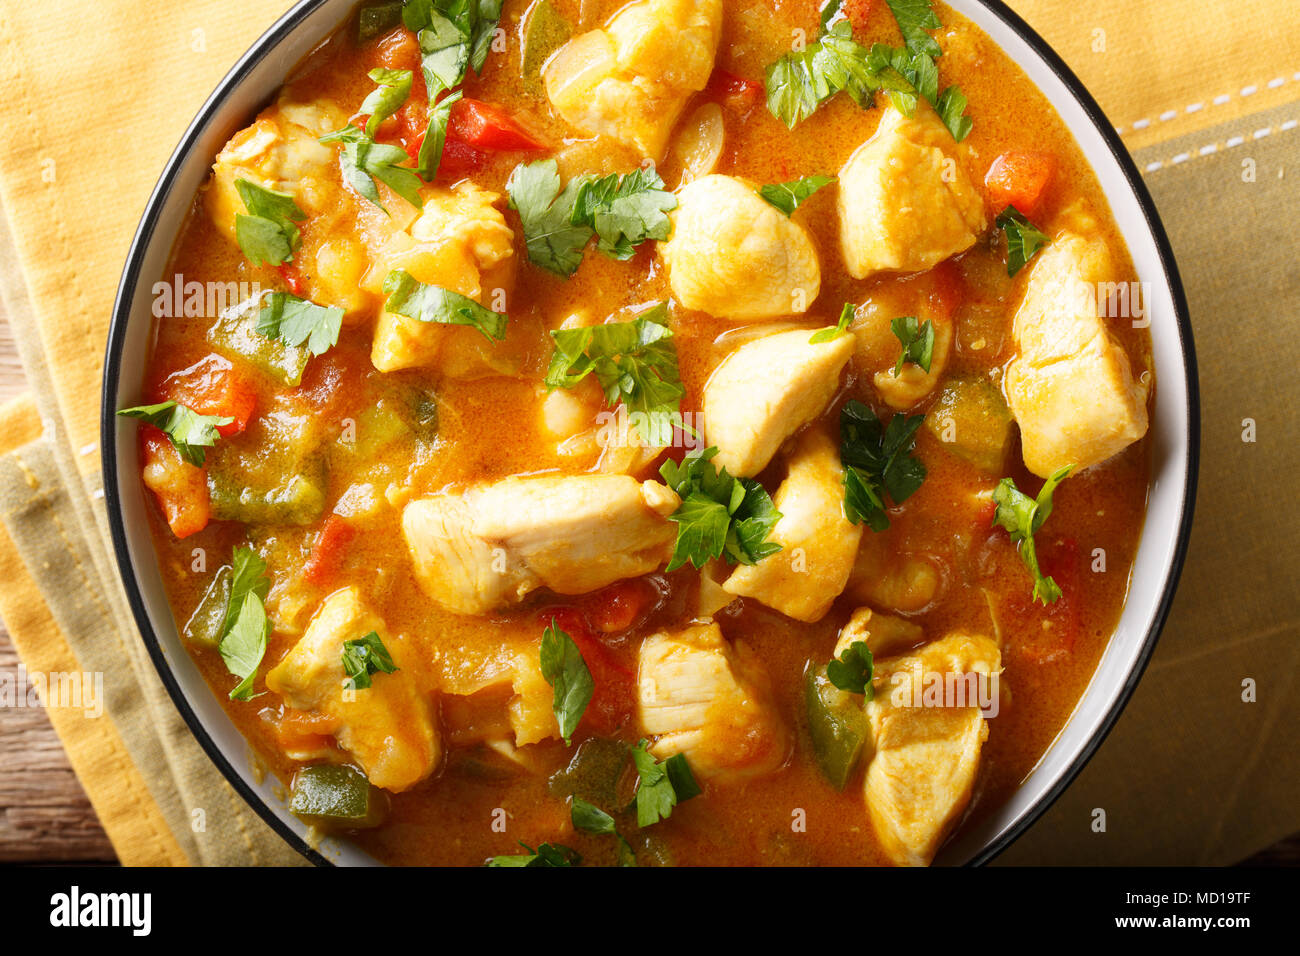 South American Food: Bobo chicken stew with vegetables in coconut milk close-up in a bowl. horizontal top view from above Stock Photo